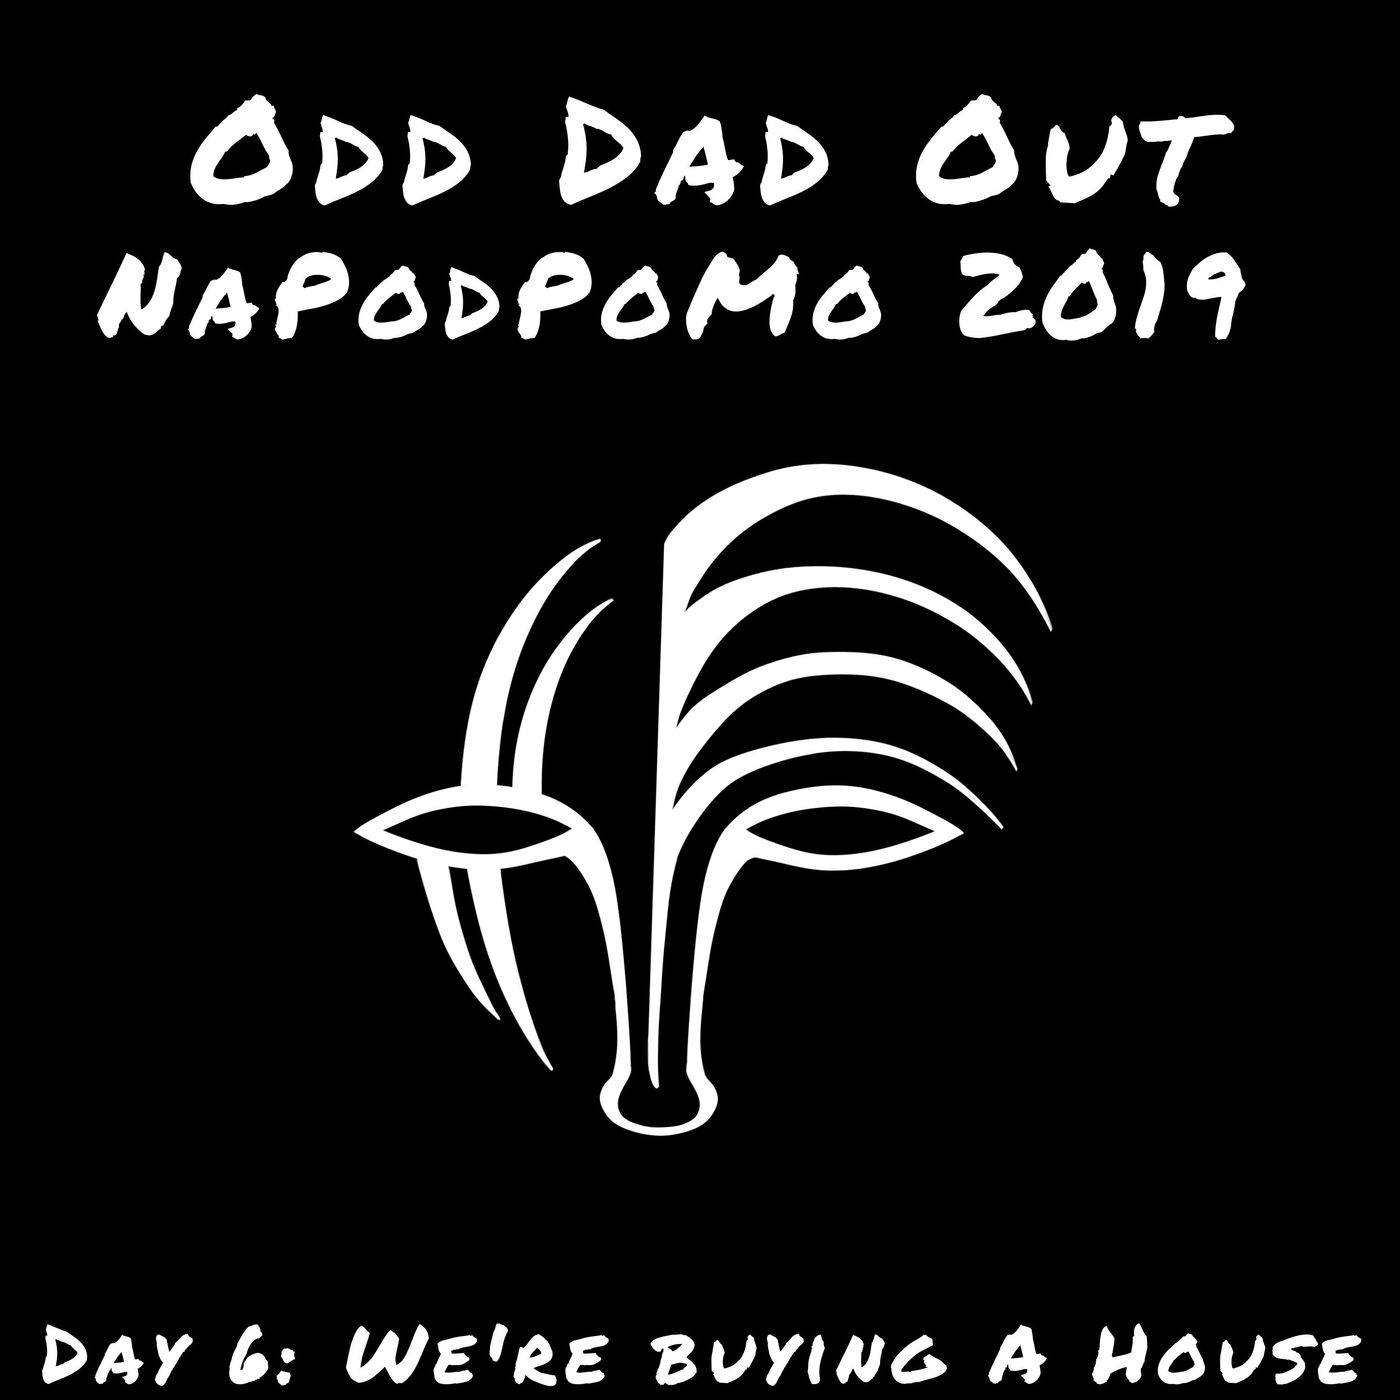 We're Buying A House: NAPODPOMO- Day 6